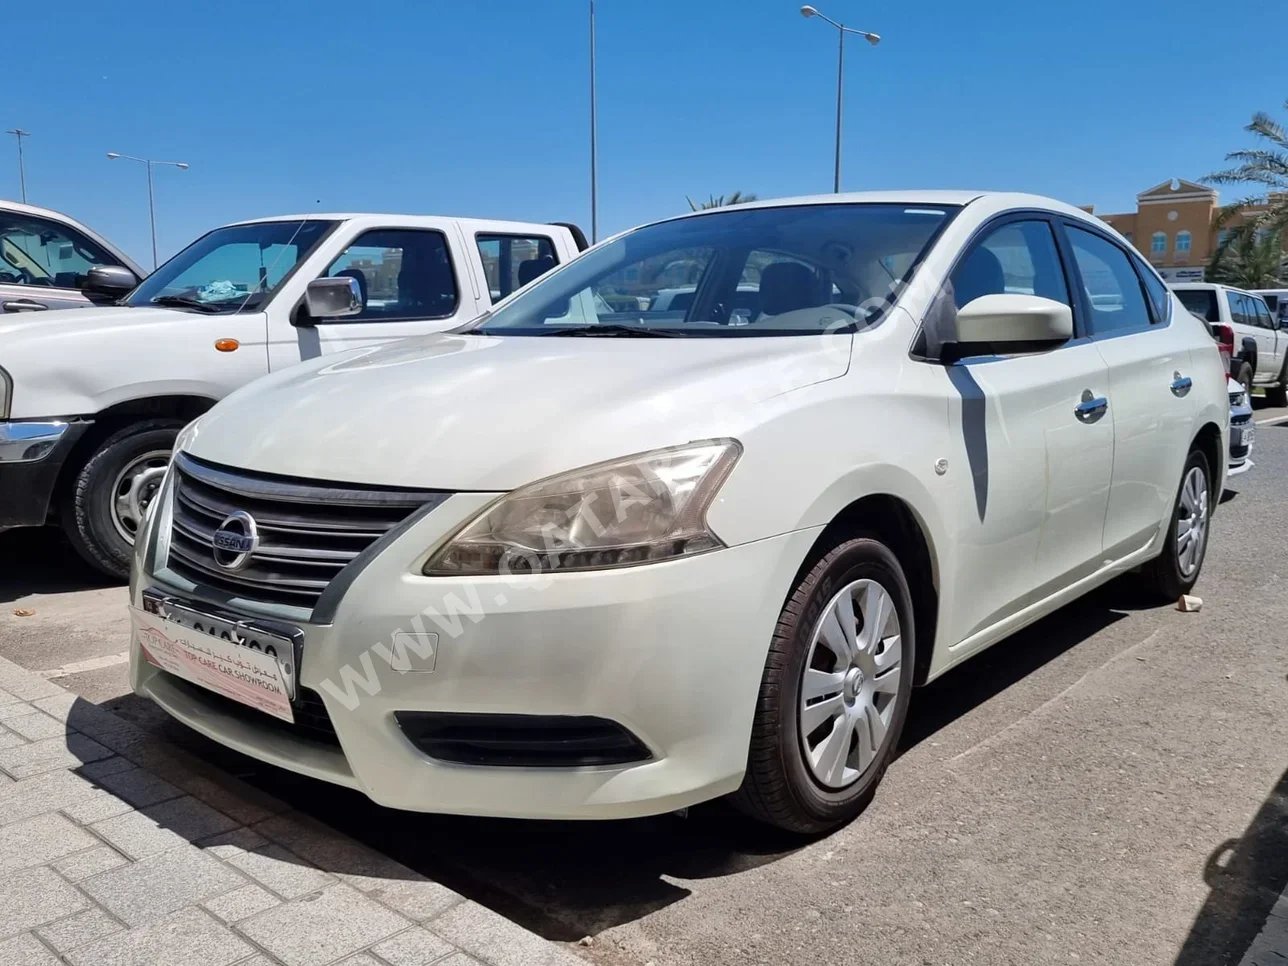  Nissan  Sentra  2014  Automatic  100,000 Km  4 Cylinder  Front Wheel Drive (FWD)  Sedan  White  With Warranty